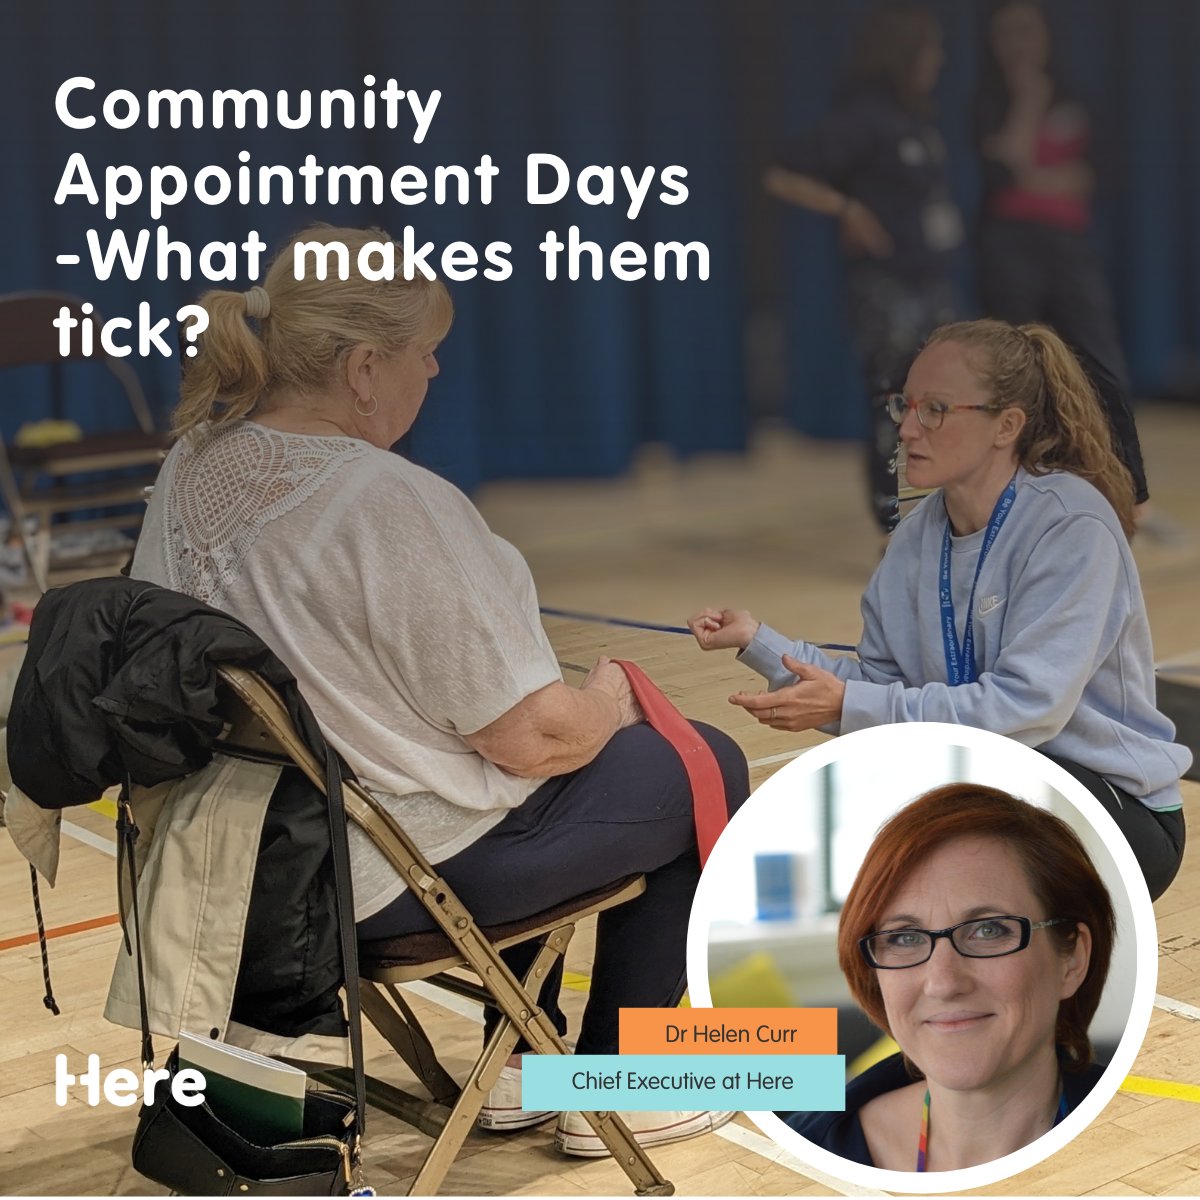 Could our Community Appointment Days happen anywhere?
Learn what makes them work in @HelenCurrHere's latest blog: hereweare.org.uk/community-appo…

#MSK #WhatMattersToYou #Sussex #Community #HealthCare #HealthcareInnovation